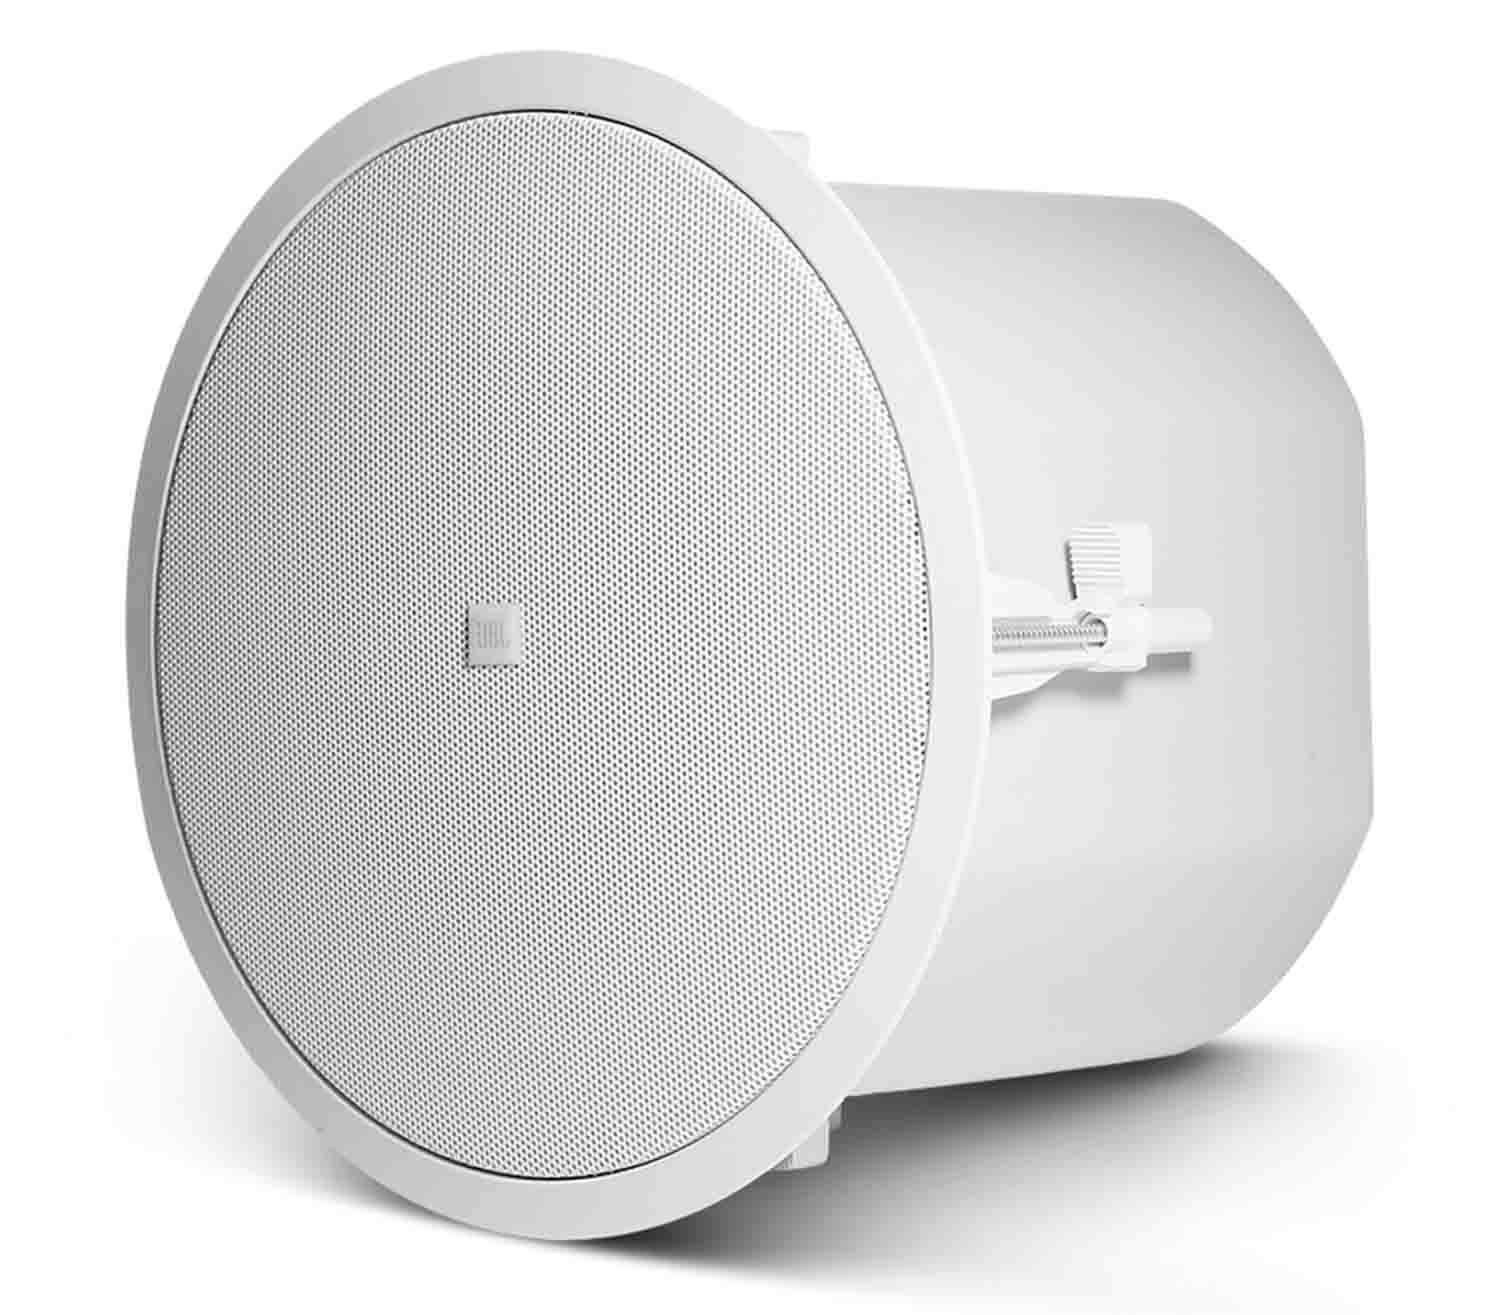 JBL CONTROL 226C/T, 6.5" Coaxial Ceiling Loudspeaker with HF Compression Driver - Hollywood DJ